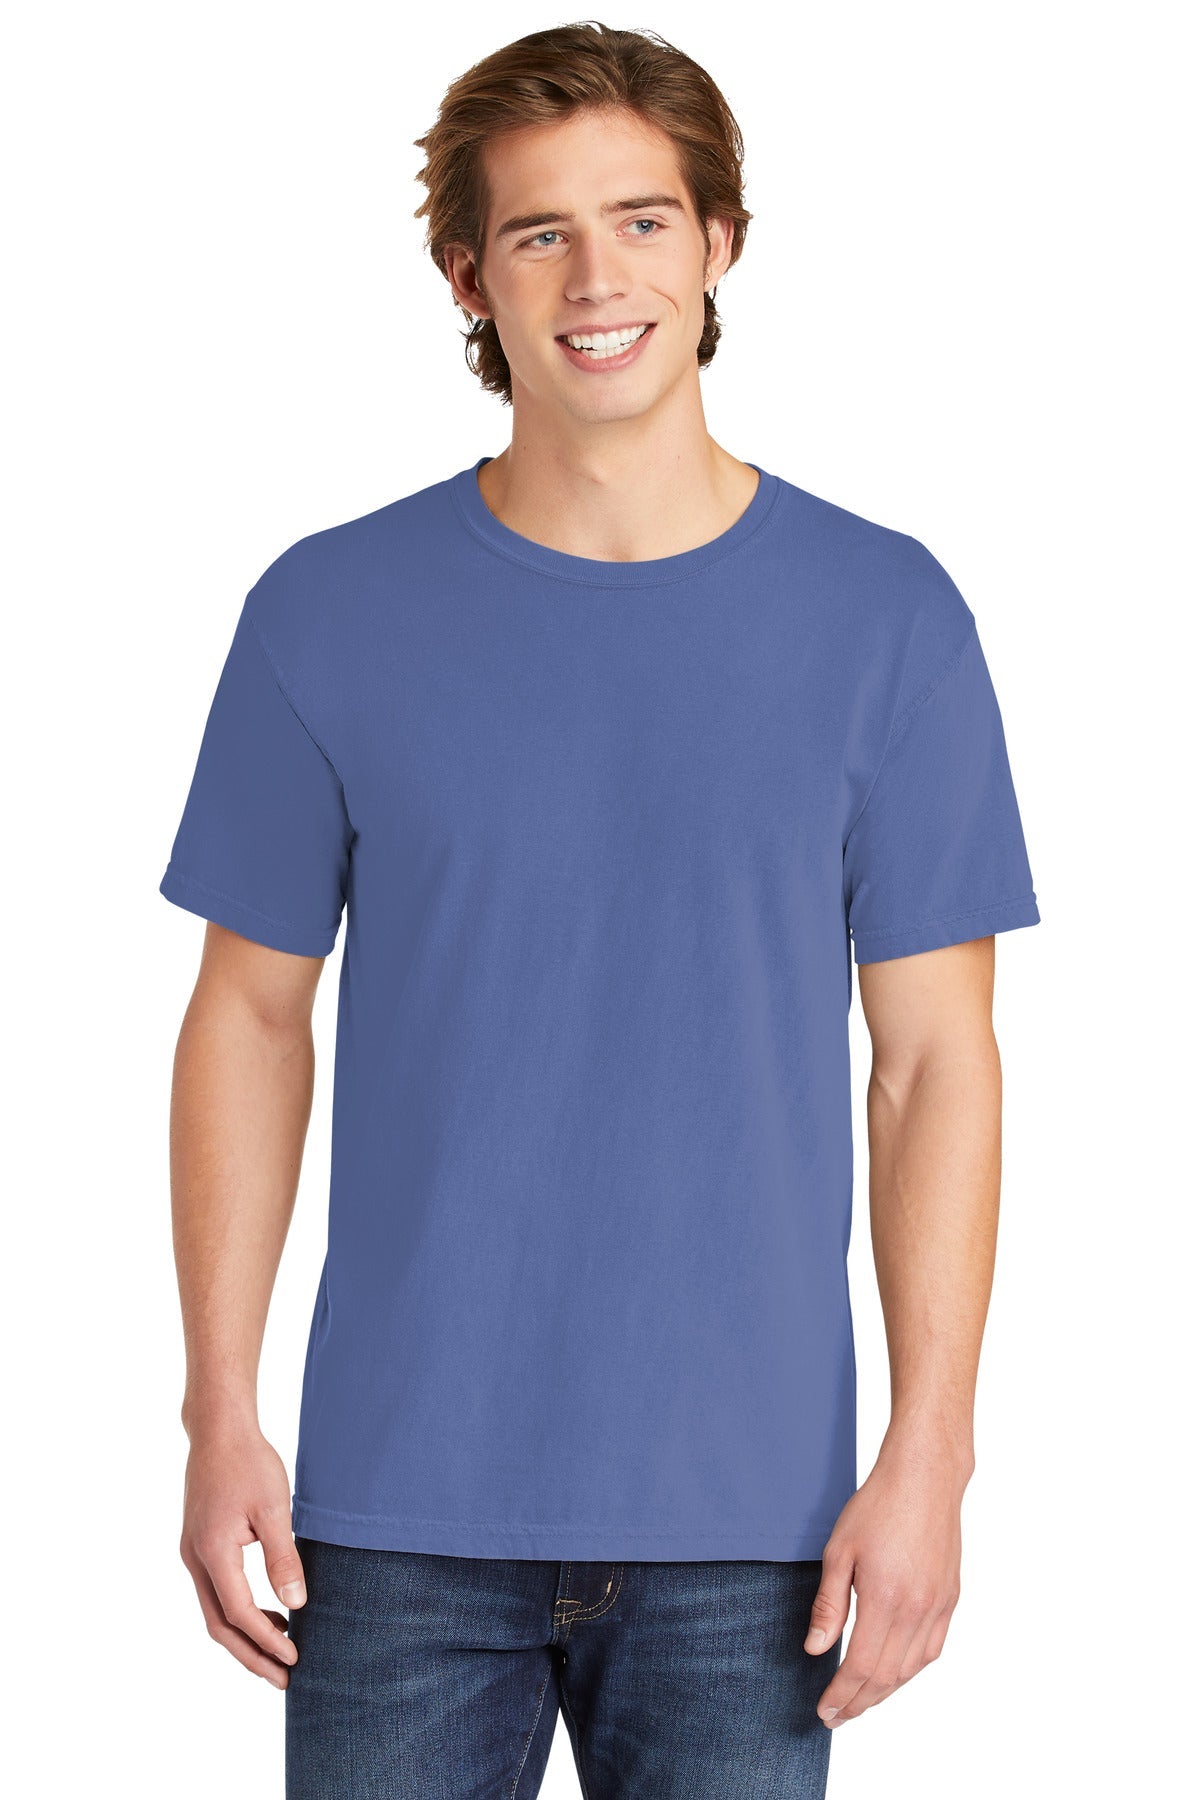 COMFORT COLORS ® Heavyweight Ring Spun Tee. 1717 [Perwinkle] - DFW Impression